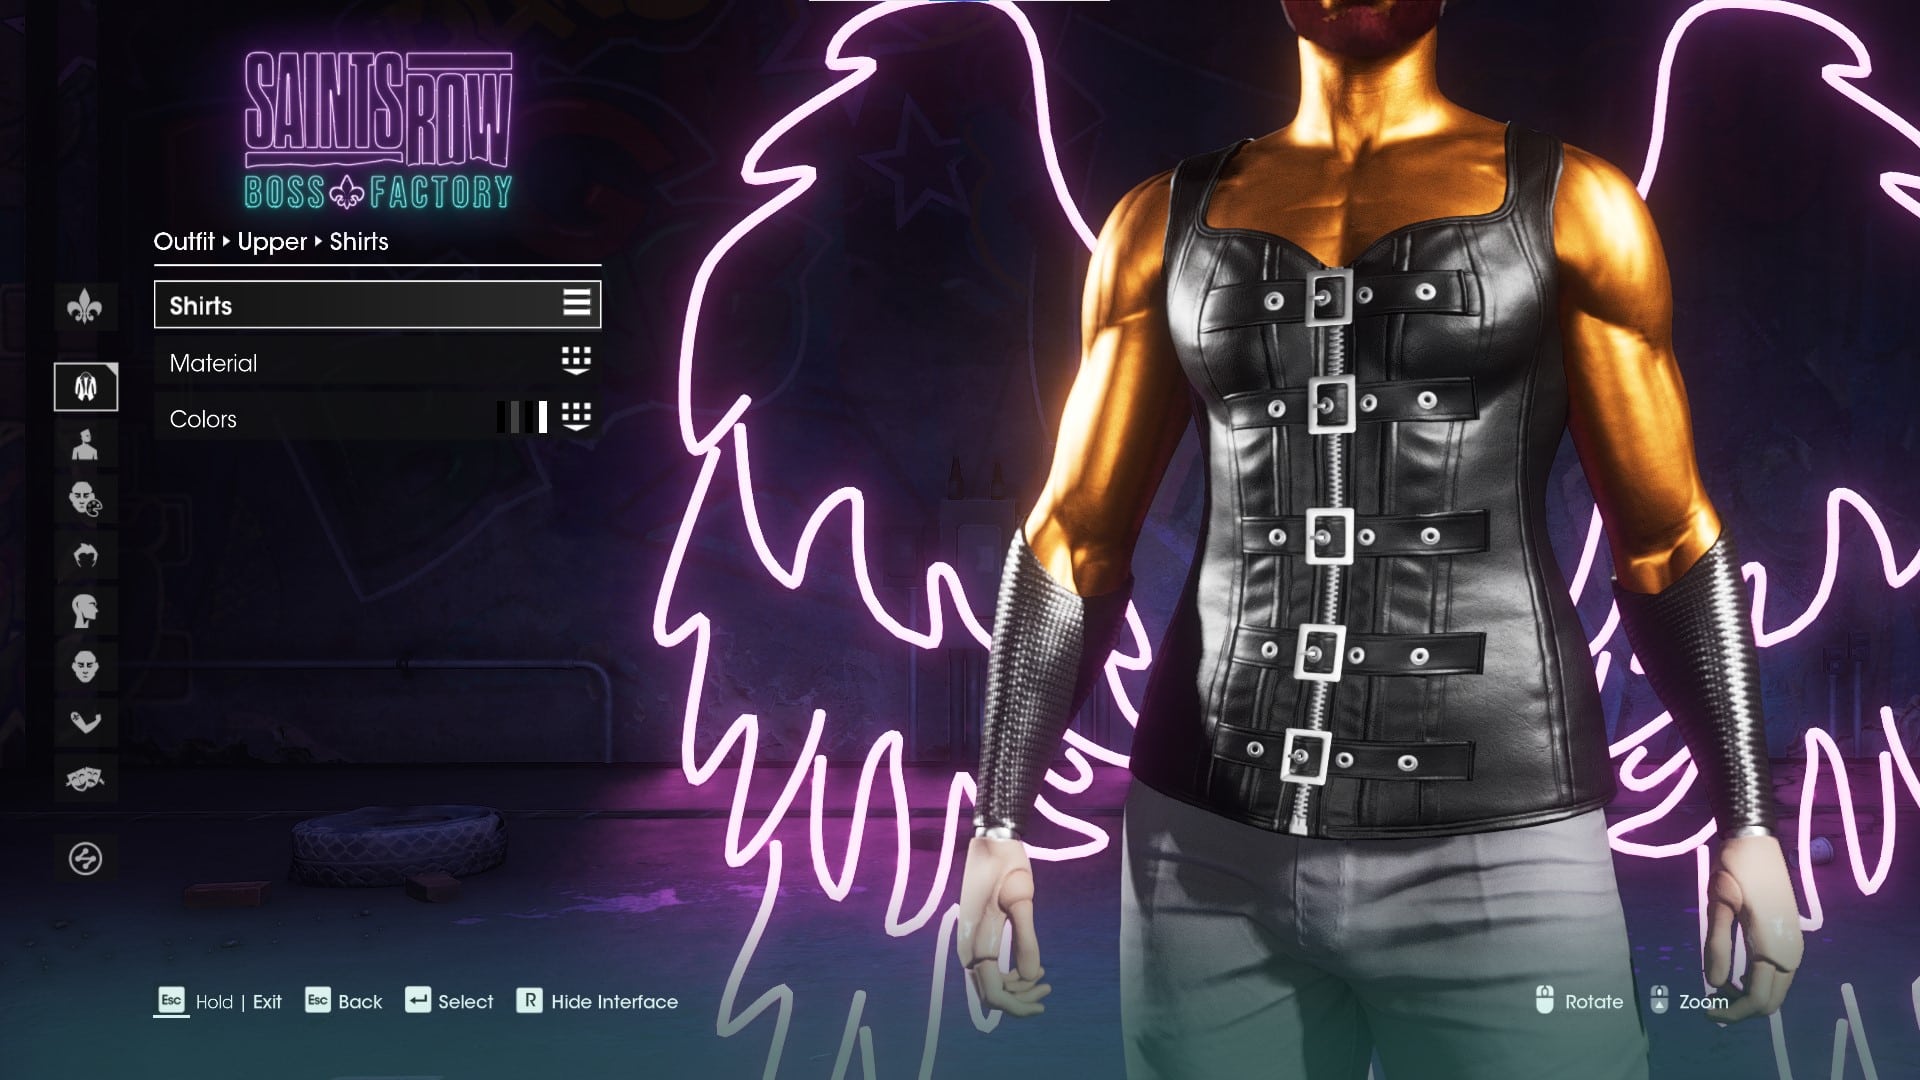 The Saints Row Boss Factory shirts screen. The character is wearing a leather corset